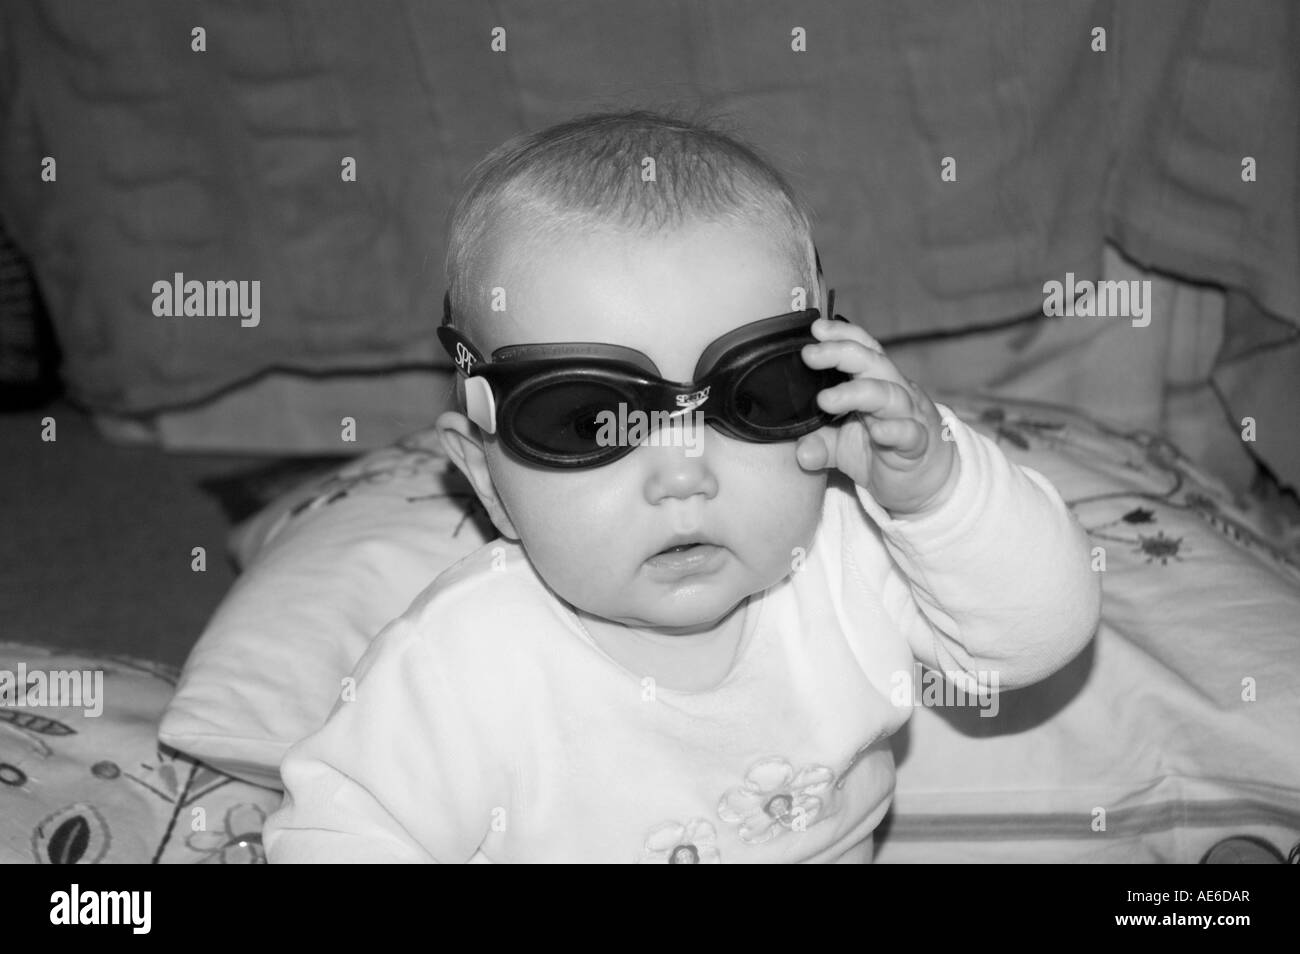 Image of Baby With Swimming Goggles Stock Photo